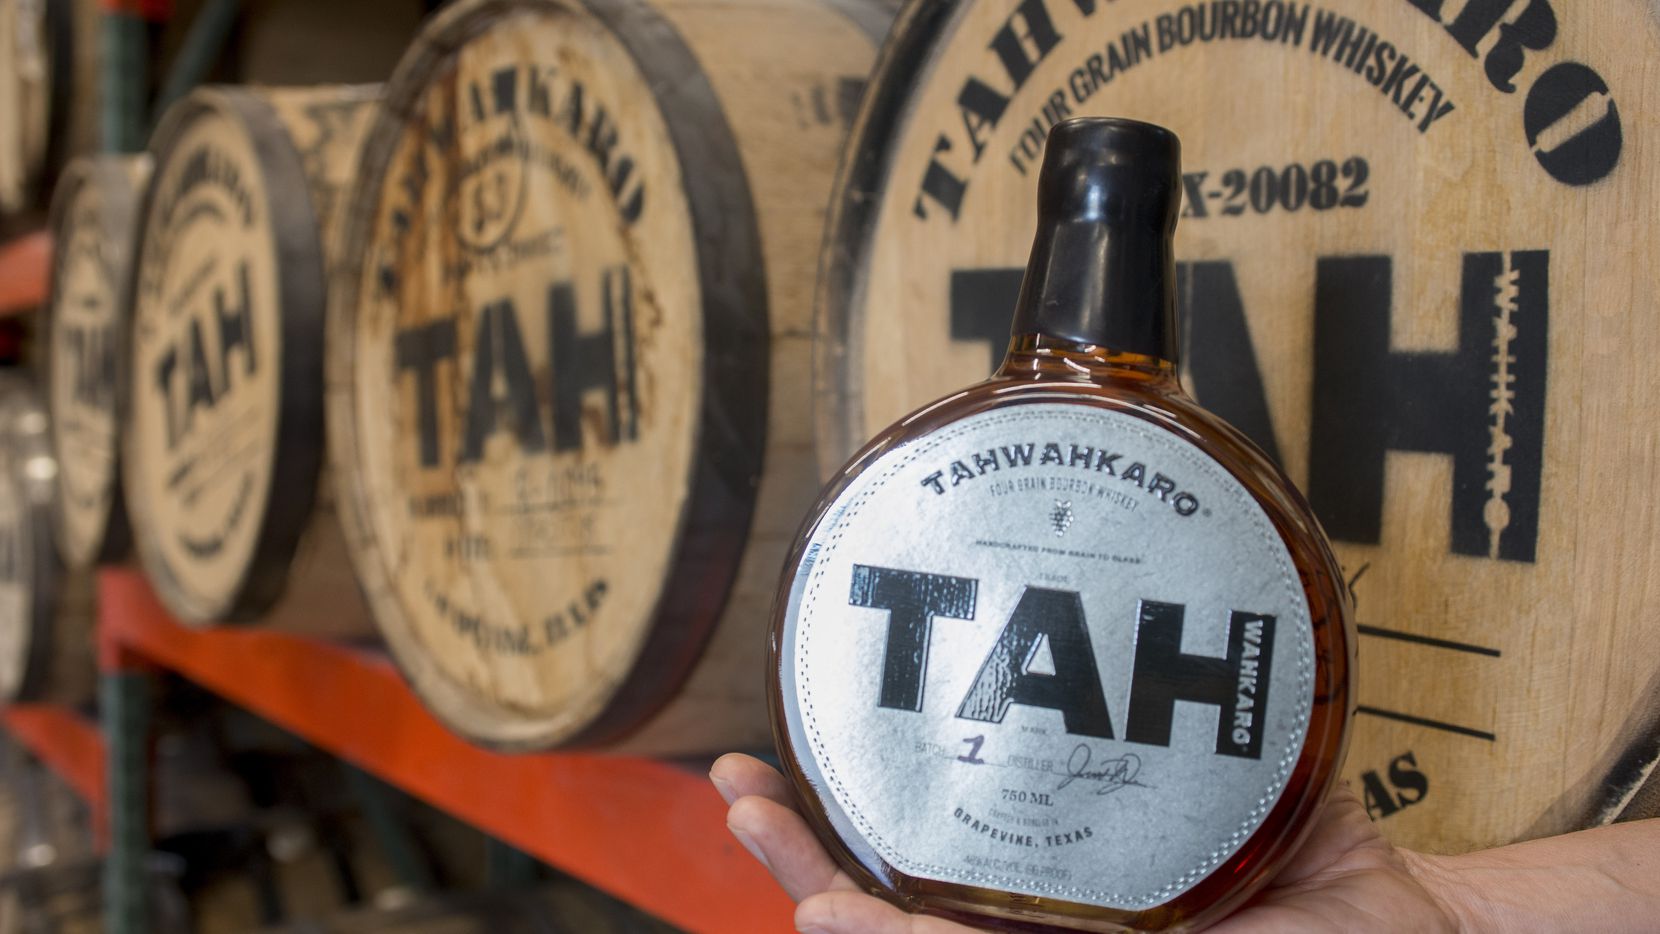 Chris Vivion holds a first-batch bottle of Tahwahkaro four-grain bourbon whiskey at the...